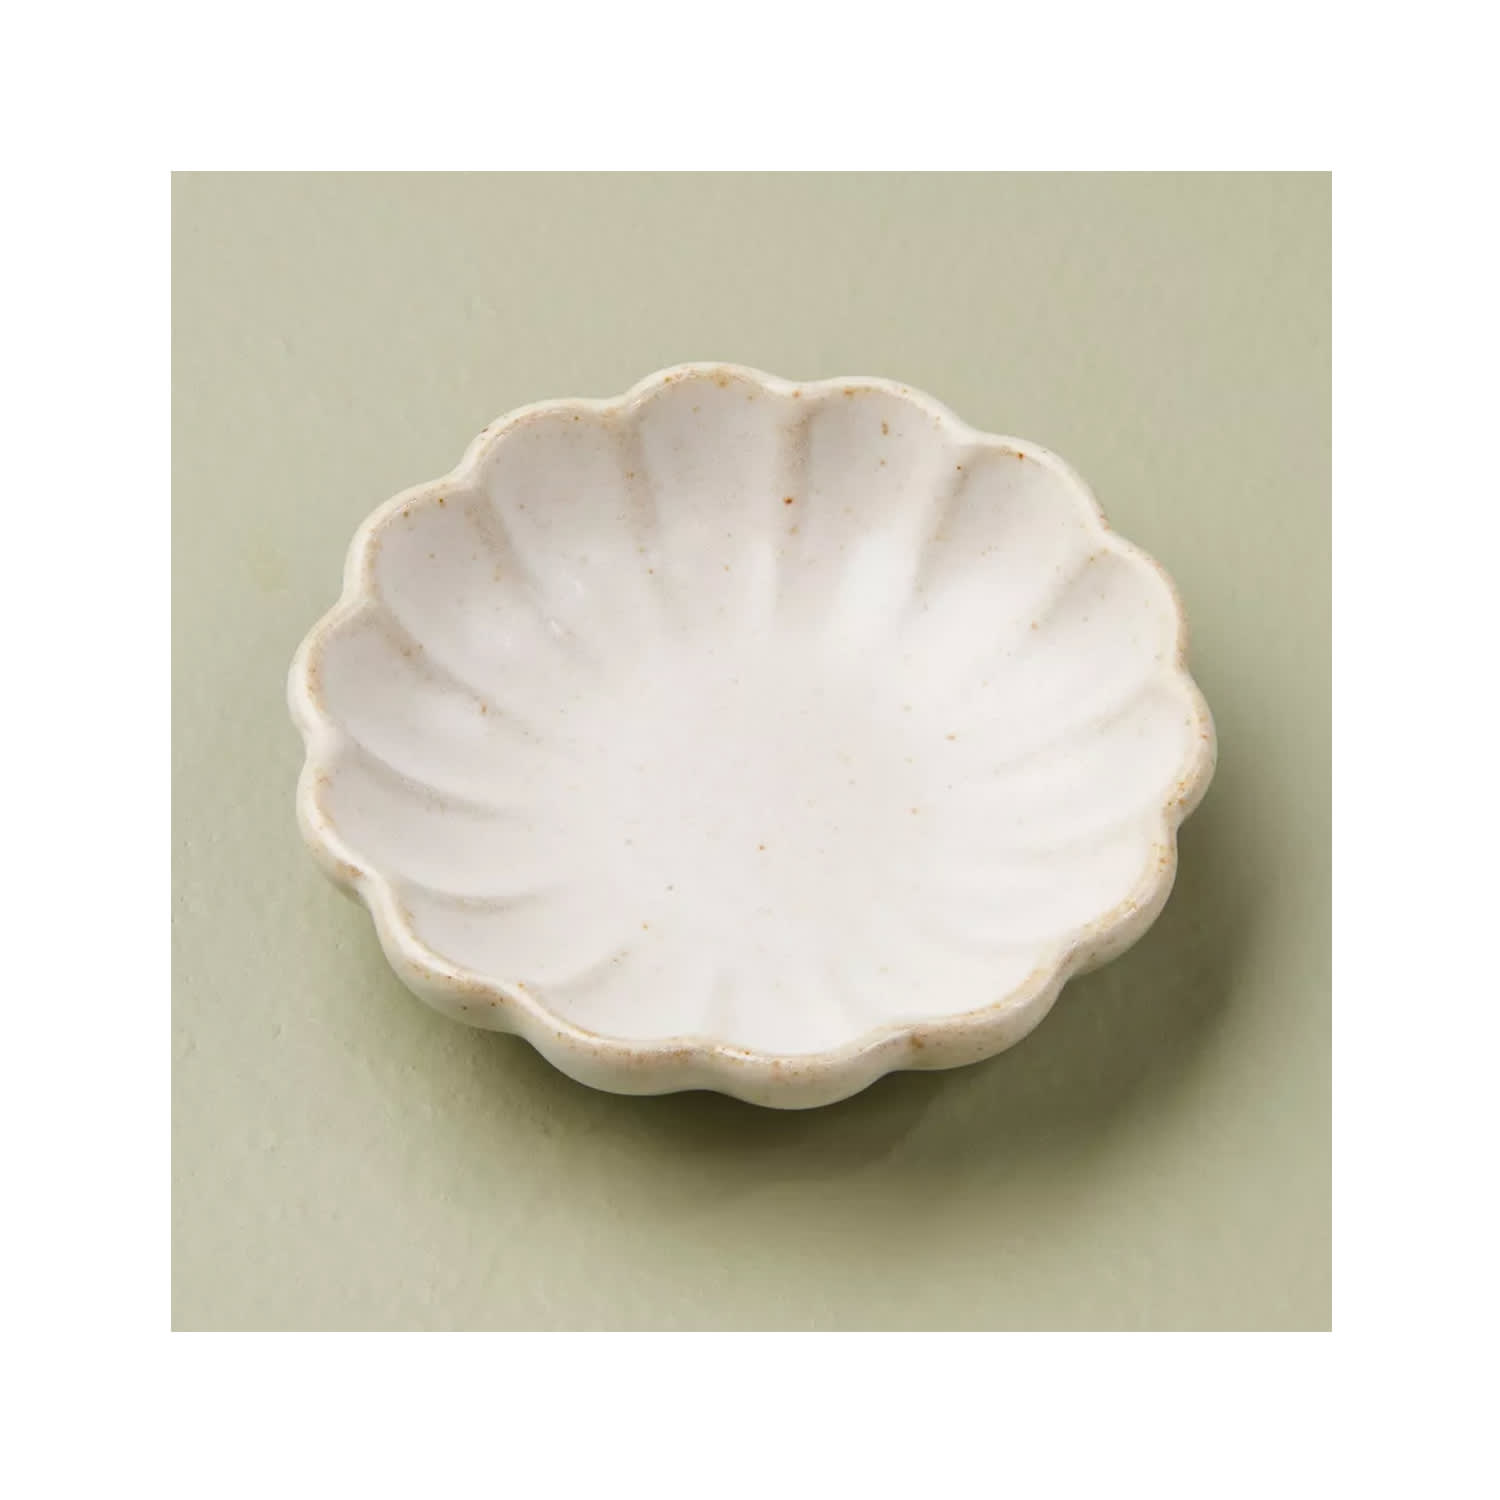 Target's “Adorable” $5 Trinket Dish by Magnolia Is a Must-Have